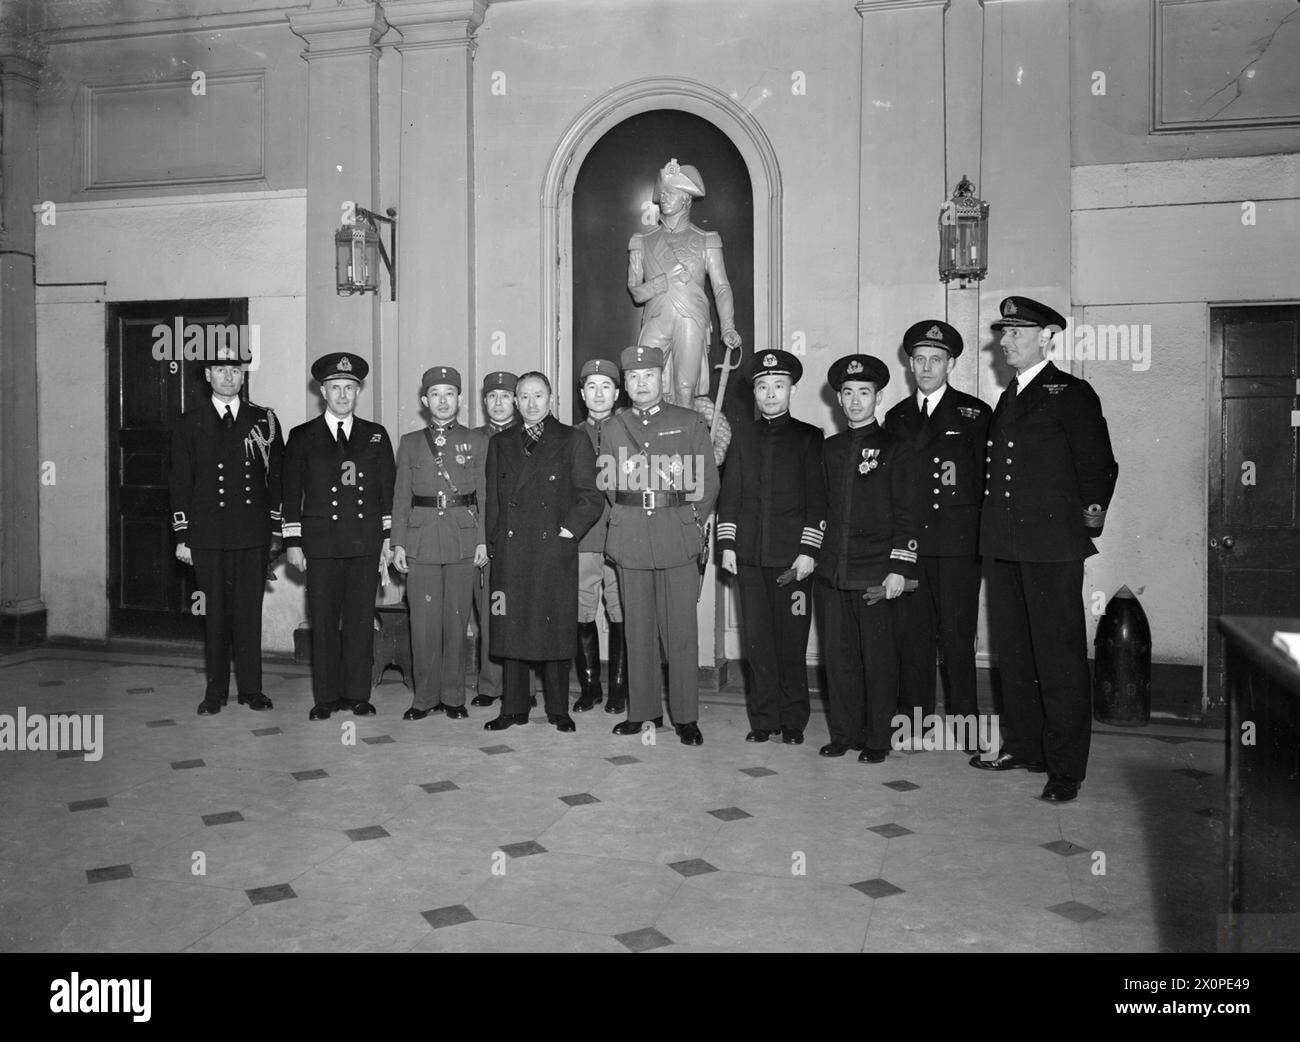 CHINESE MILITARY MISSION VISITS ADMIRALTY. 31 JANUARY 1944, ADMIRALTY, LONDON. THE CHINESE MILITARY MISSION CONSISTING OF SEVEN MEMBERS IS LED BY GENERAL YANG. - Left to right: Lieut Commander H R Hardy, RNVR (Flag Lieutenant to the Board of Admiralty); Rear Admiral C H J Harcourt, CBE; Major Gen Wang Pi'chan; Col Hoo Kwang Shee; H E Dr V K Wellington Koo (Chinese Ambassador); Co T'ang Pao-Huang (Military Attache); General Yang Chieh (Head of the Mission); Capt Chow Hsien Chang; Lieut Commander Tsin Tsang; Rear Admiral F H G Dalrymple-Hamilton, CB (Naval Secretary to the First Lord of the Admi Stock Photo